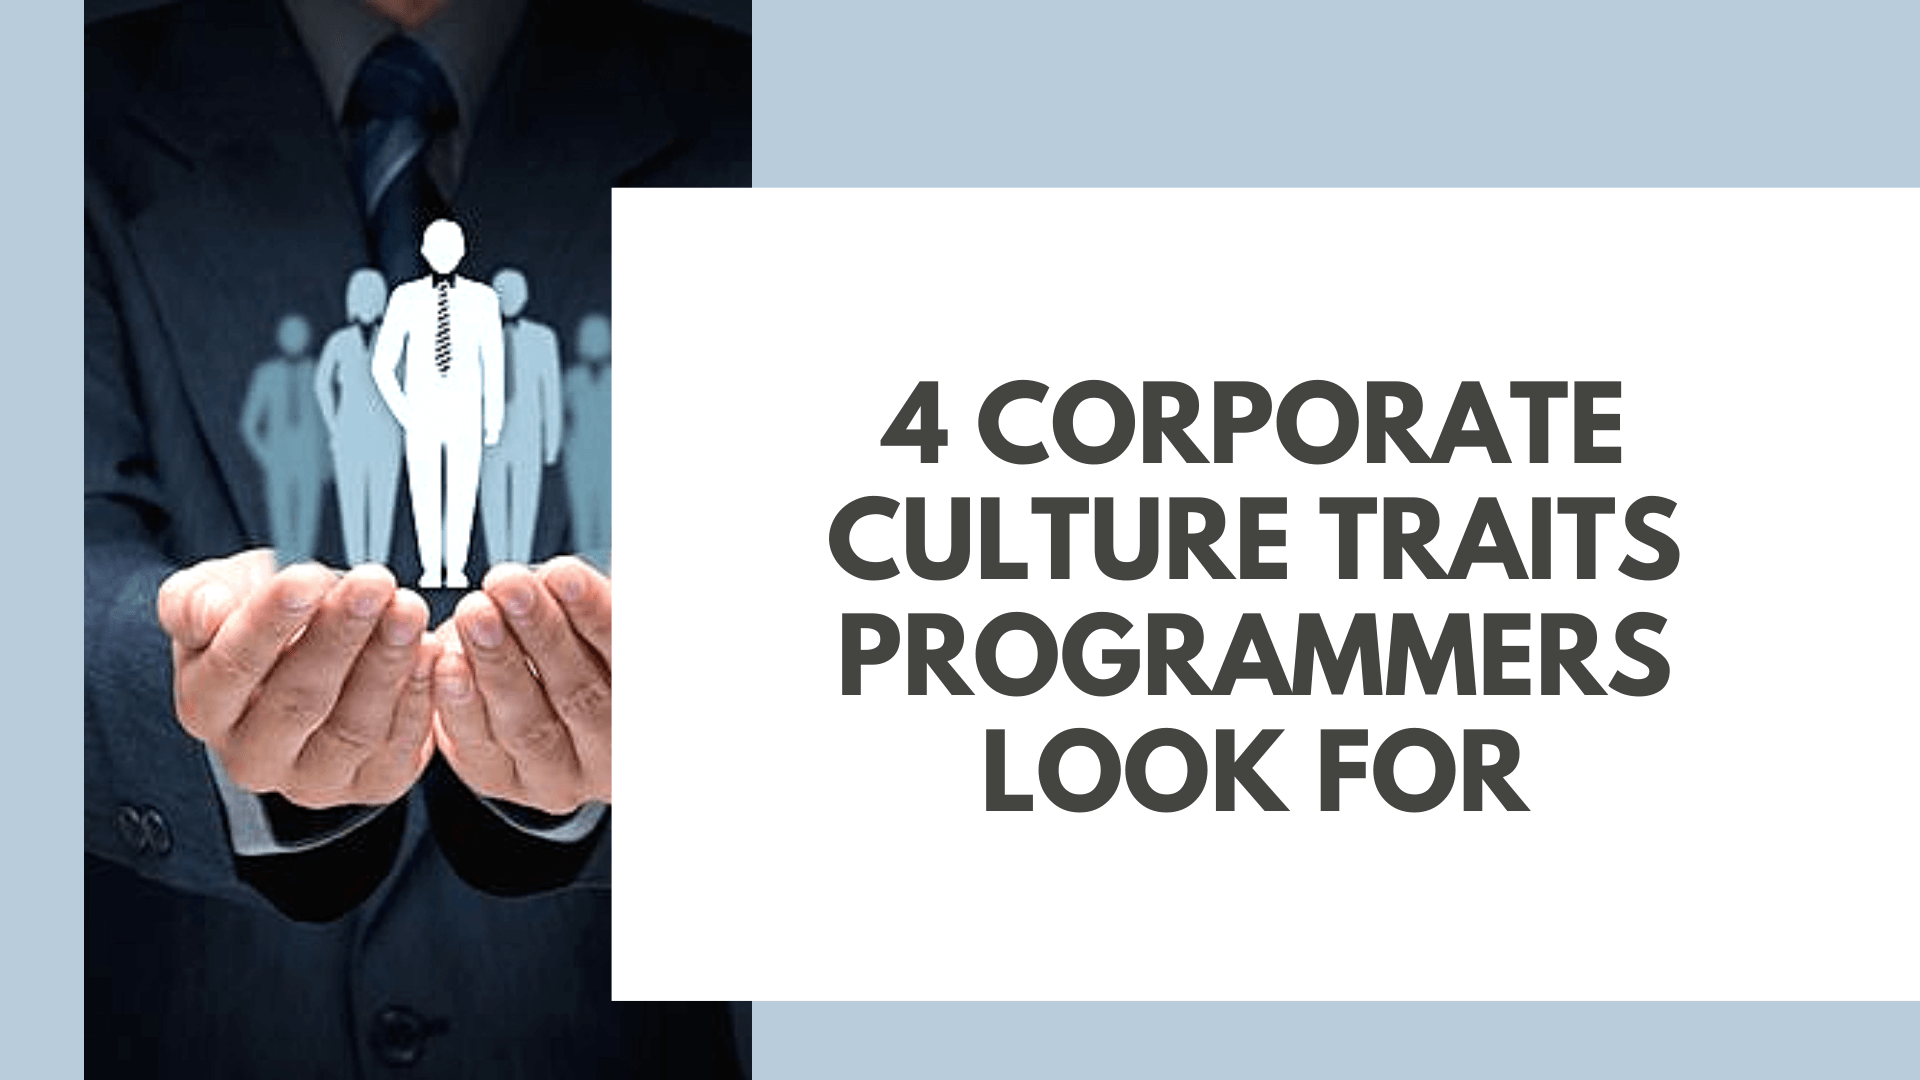 4 Corporate Culture Traits Programmers Look For